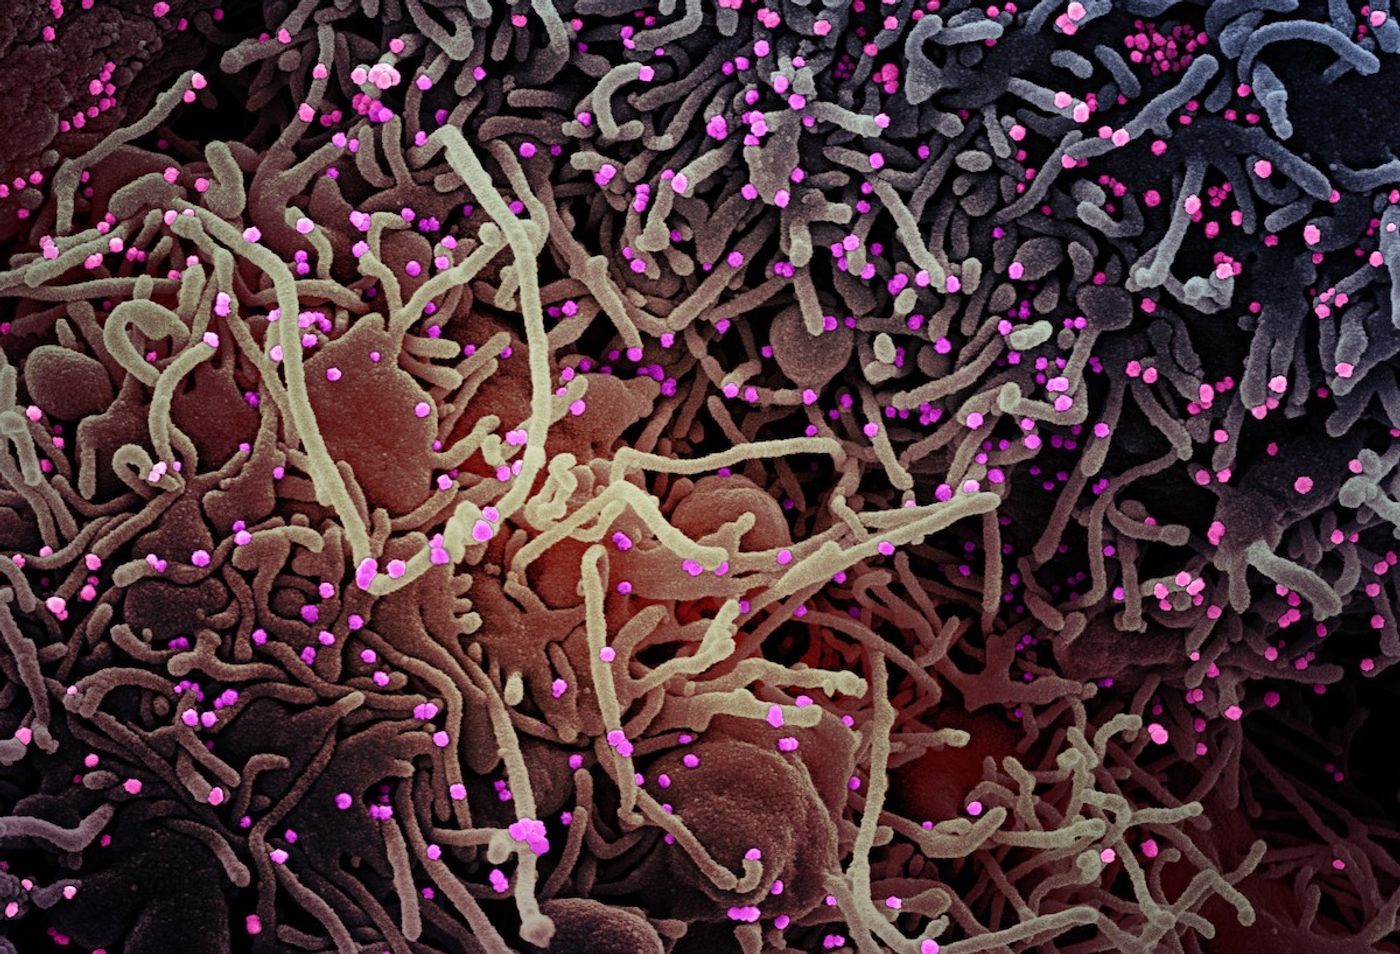 Colorized scanning electron micrograph of a VERO E6 cell (purple) exhibiting elongated cell projections and signs of apoptosis, after infection with SARS-COV-2 virus particles (pink), which were isolated from a patient sample. Image captured at the NIAID Integrated Research Facility (IRF) in Fort Detrick, Maryland. Credit: NIAID